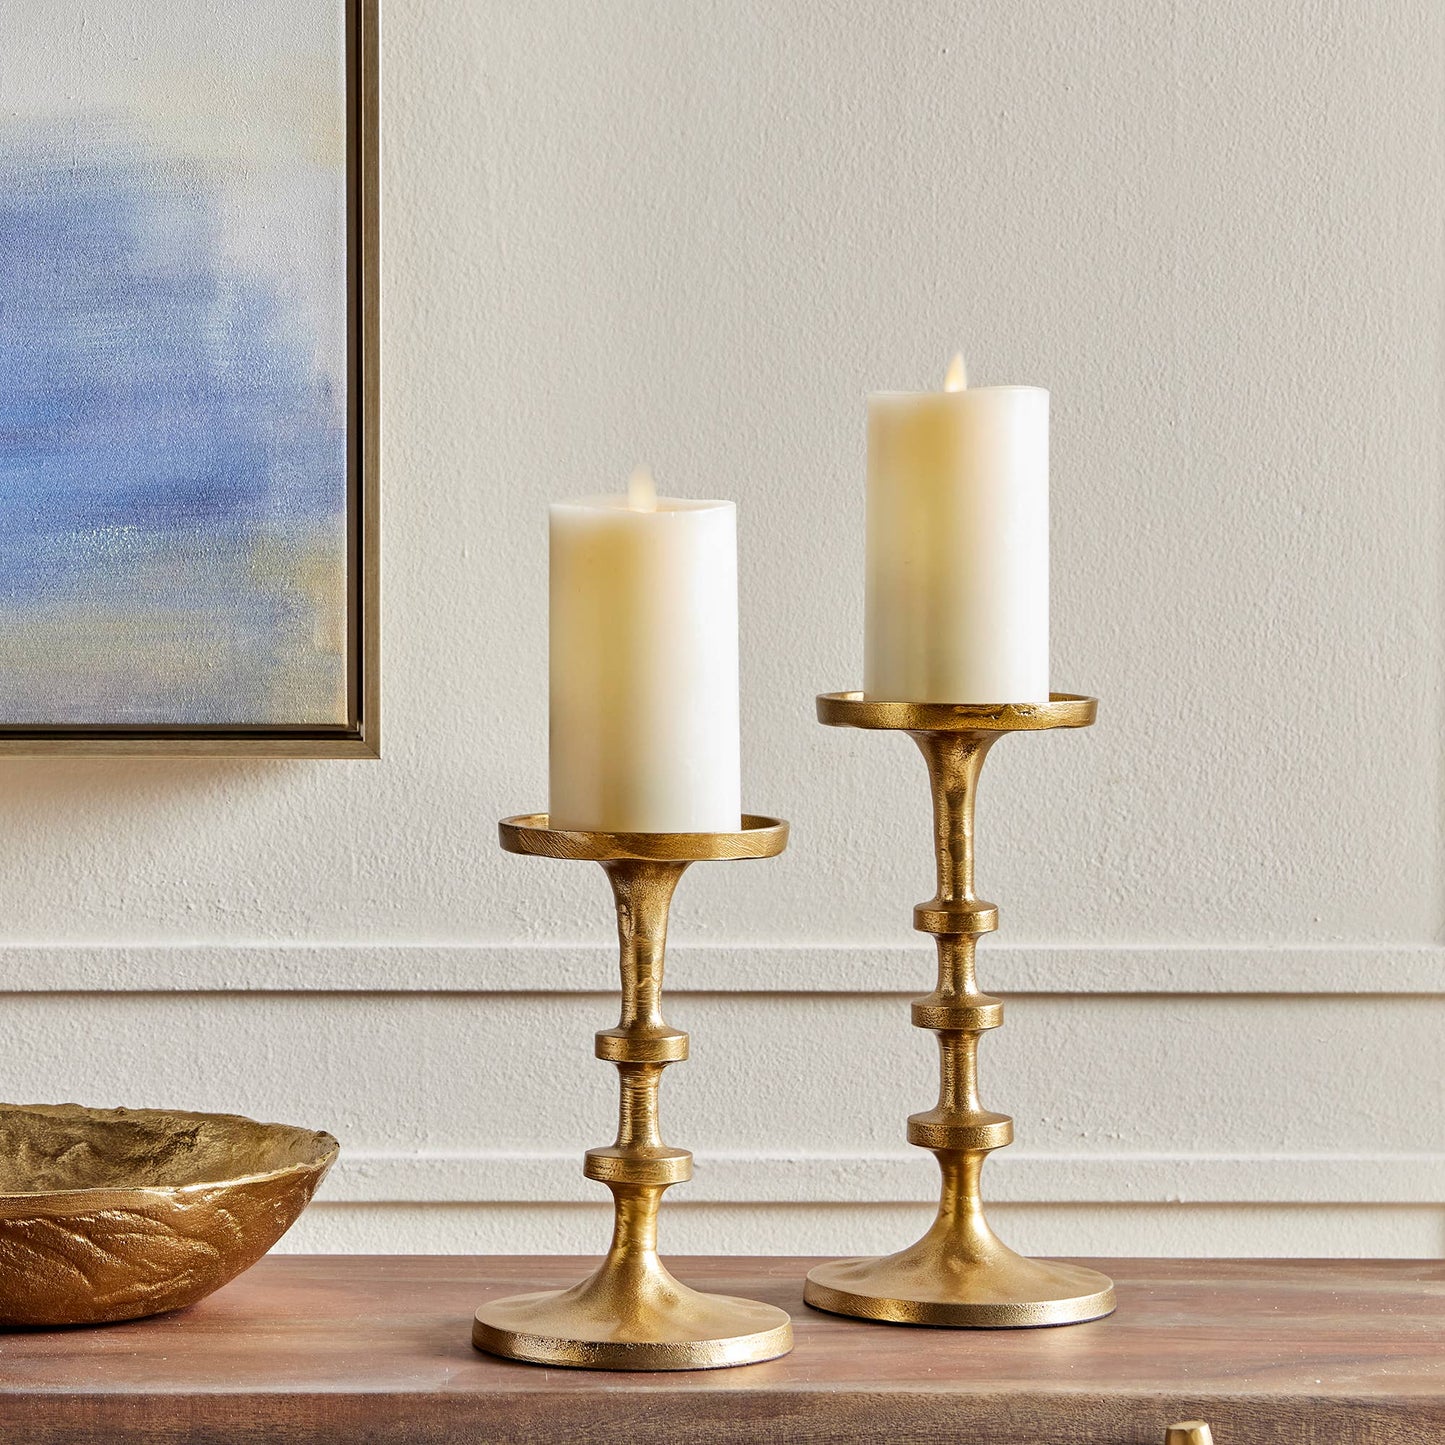 ABACUS PETITE CANDLE STANDS, SET OF 2 BRASS